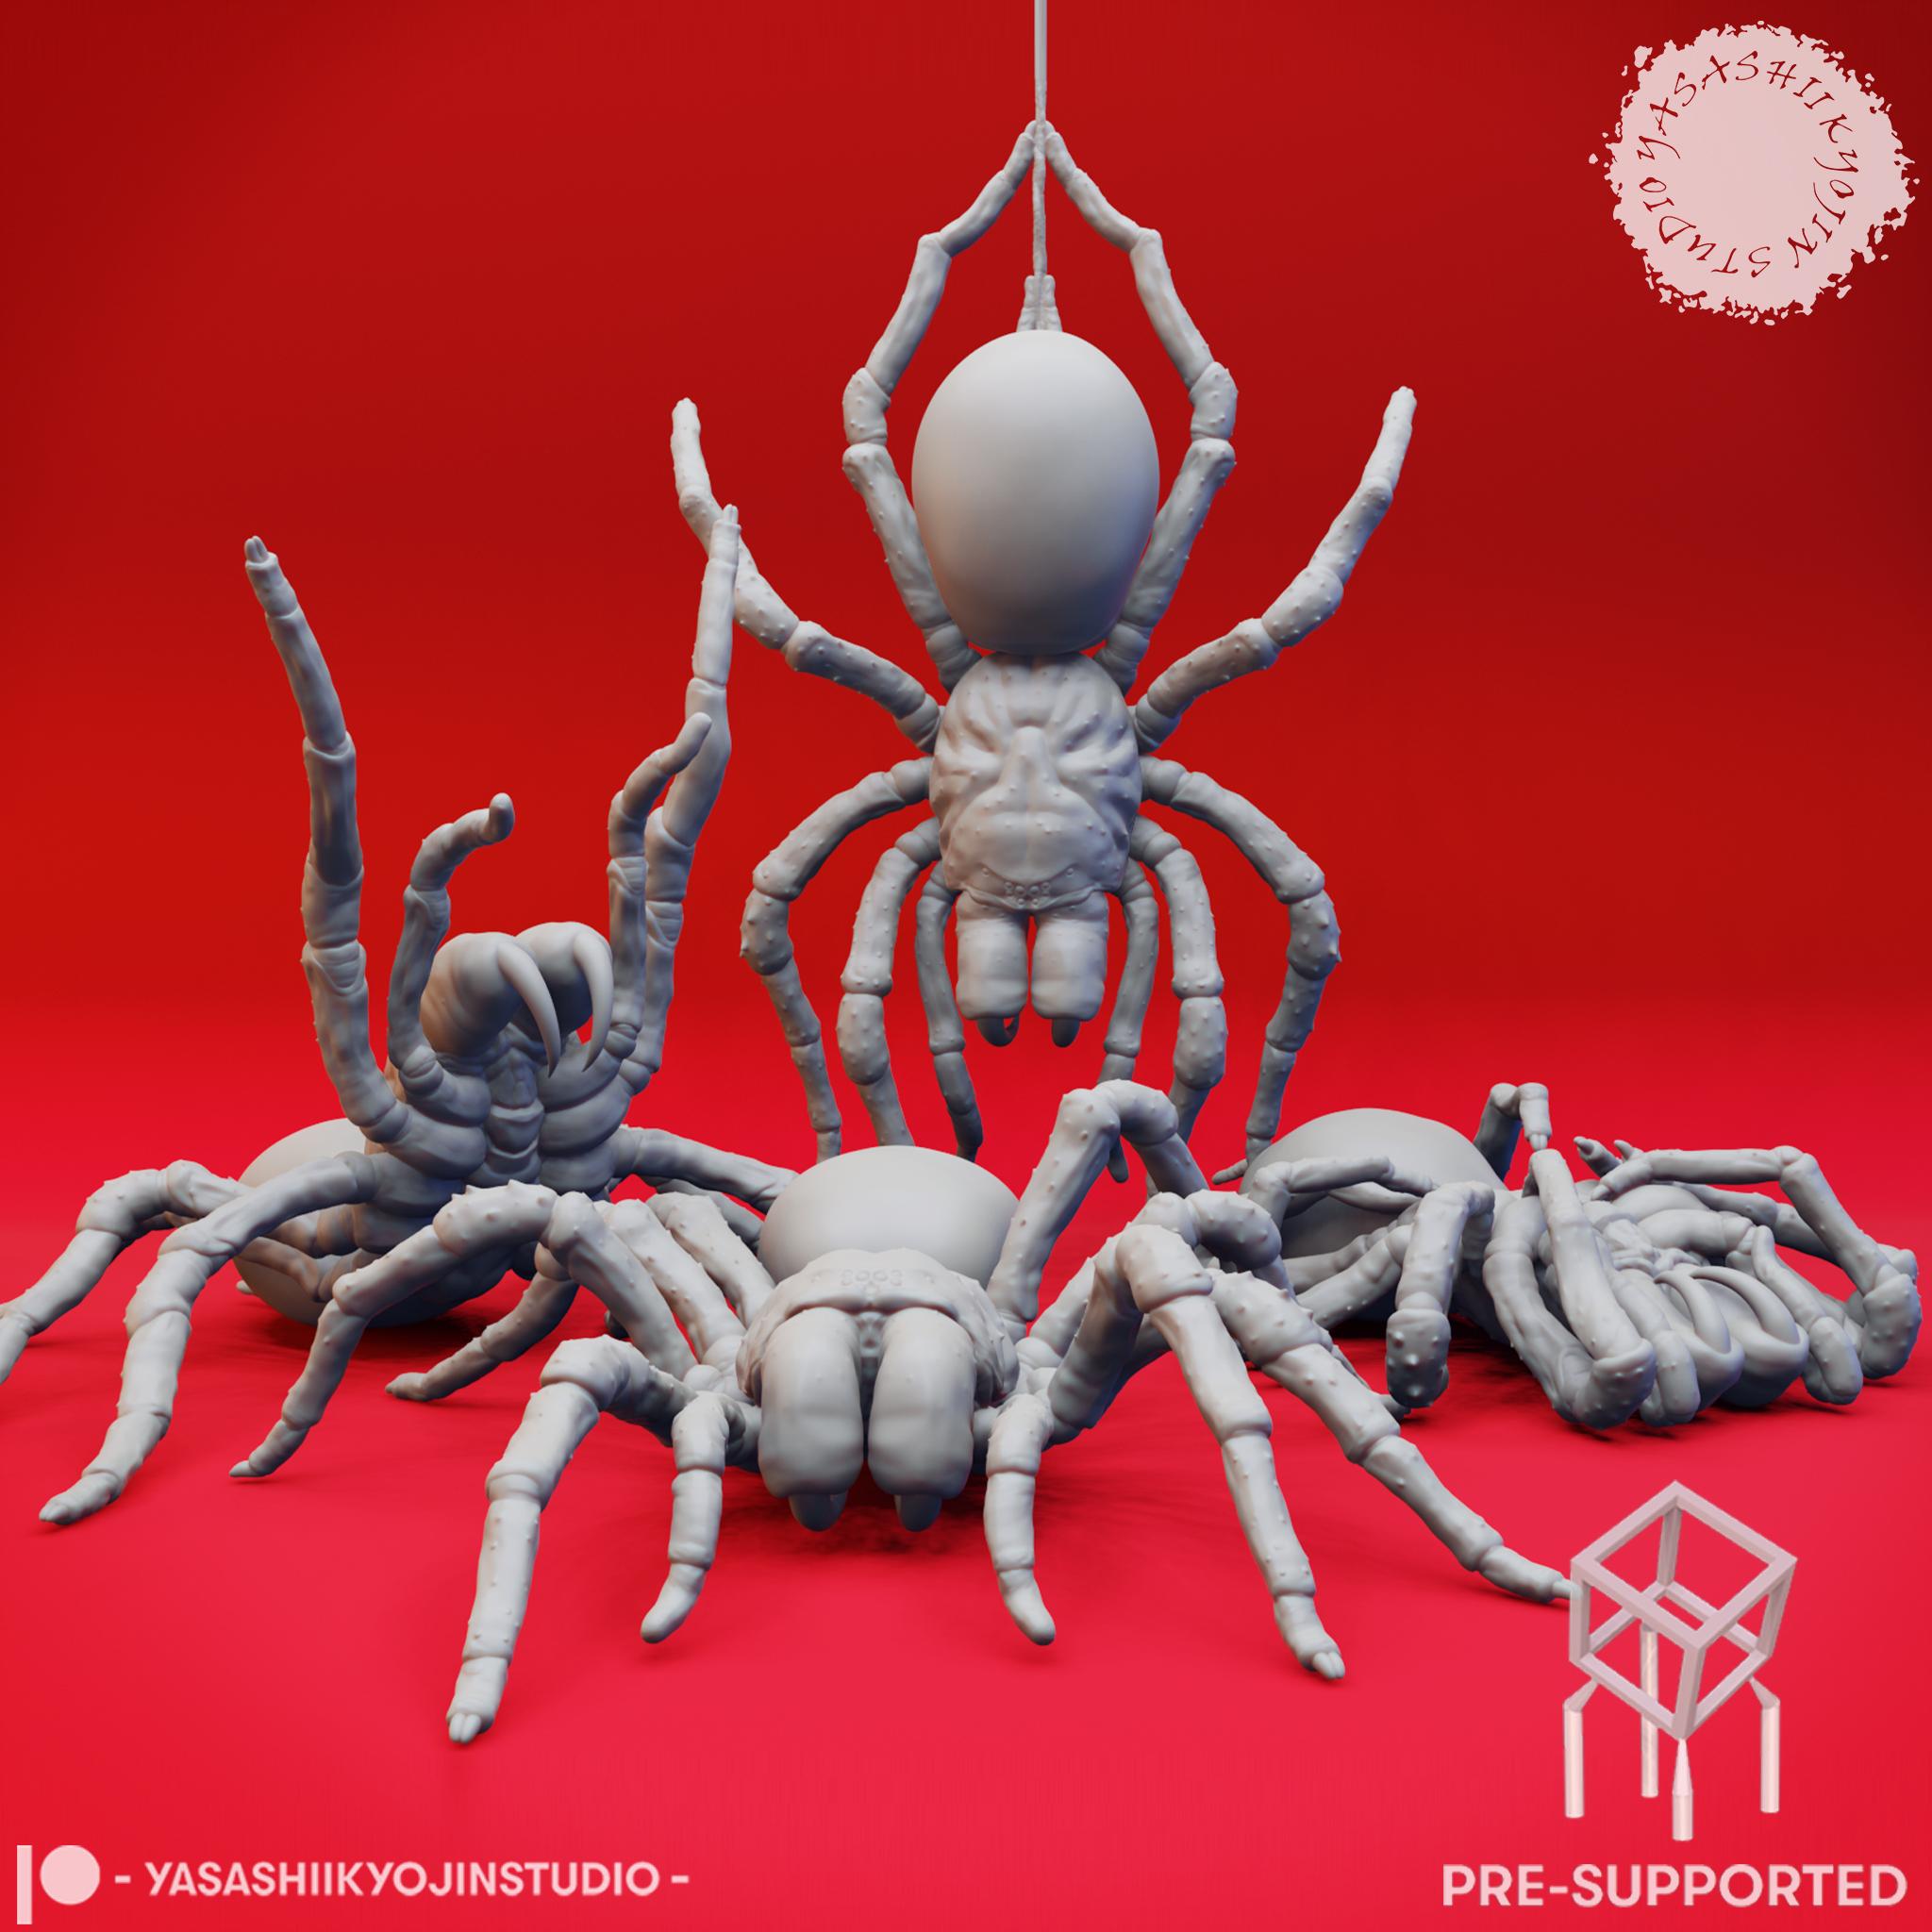 Giant Spiders Released!